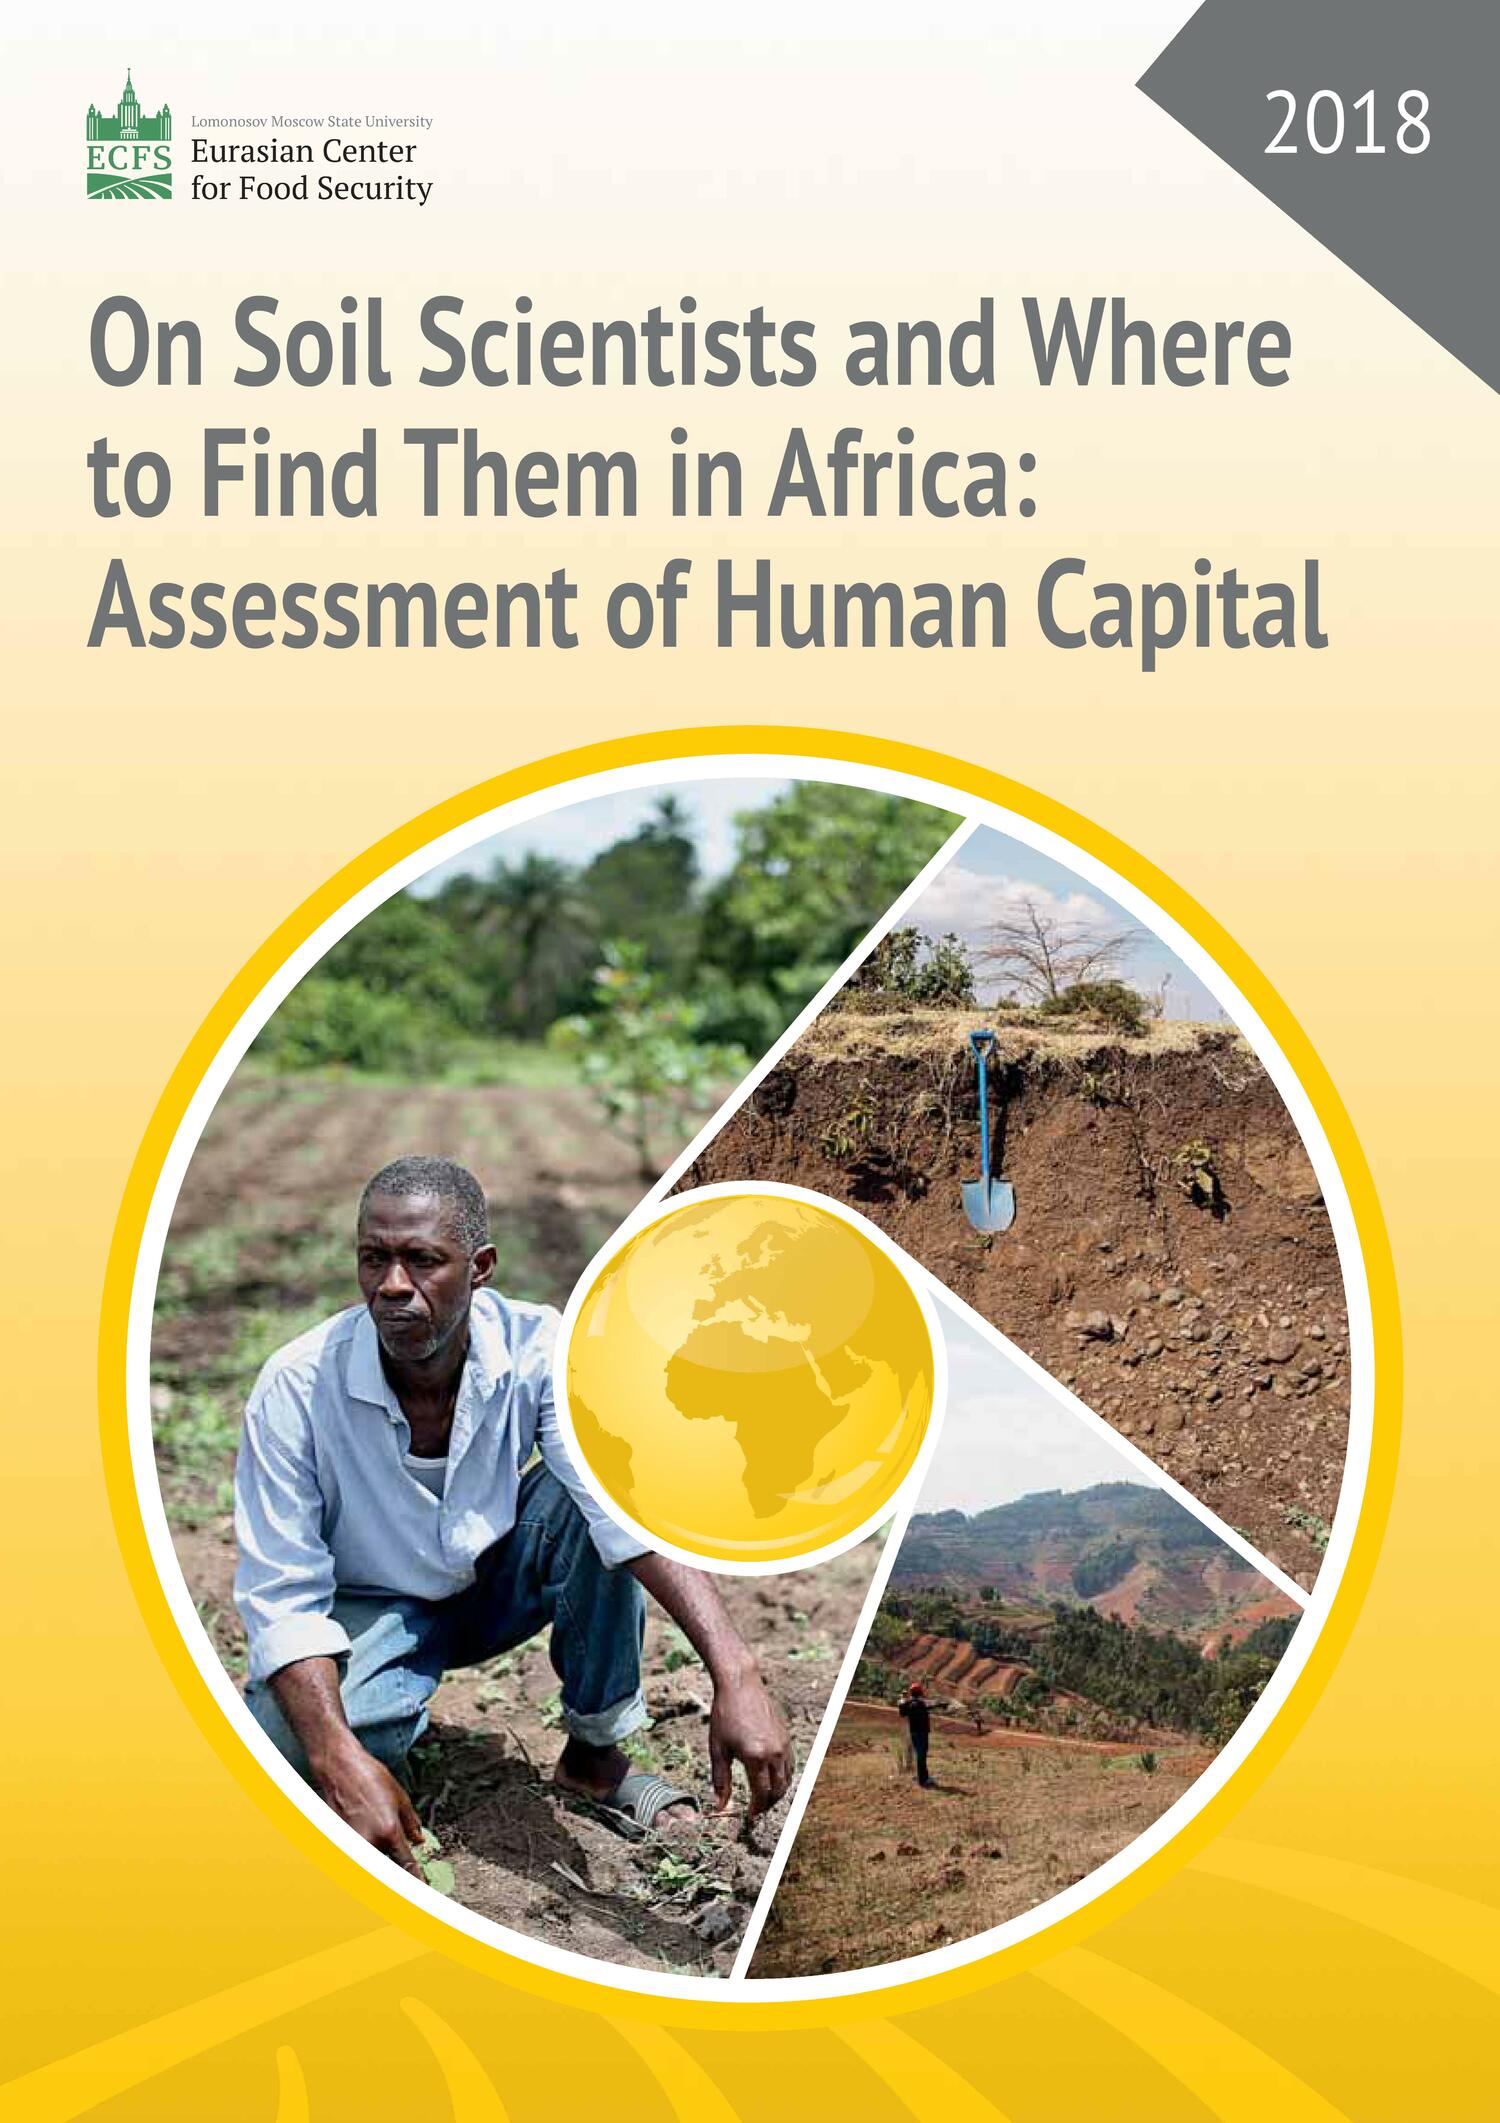 On Soil Scientists and Where to Find Them in Africa: Assessment of Human Capital